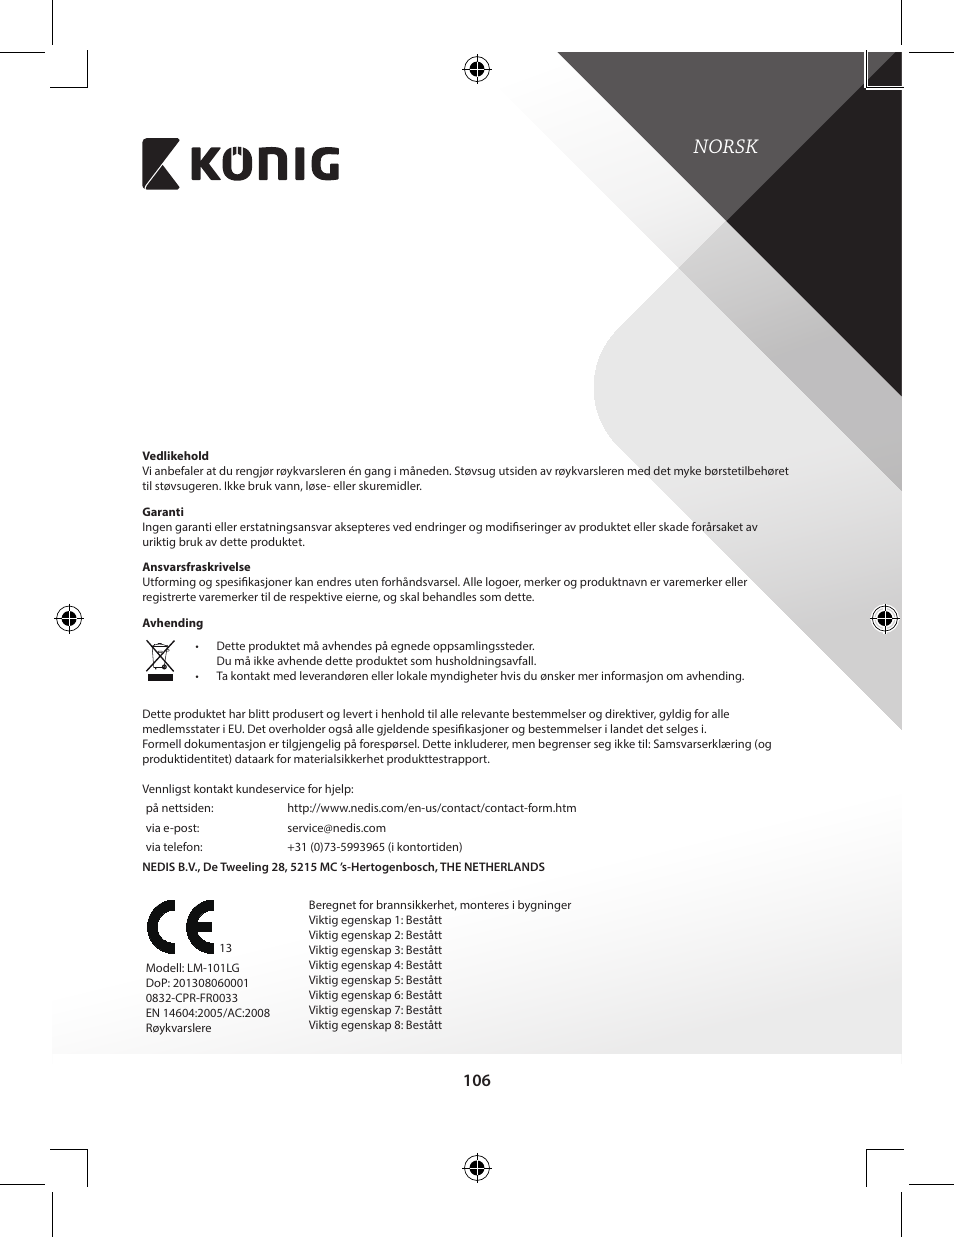 Norsk | Konig Electronic Duo-pack wireless interconnectable smoke alarm  User Manual | Page 106 / 176